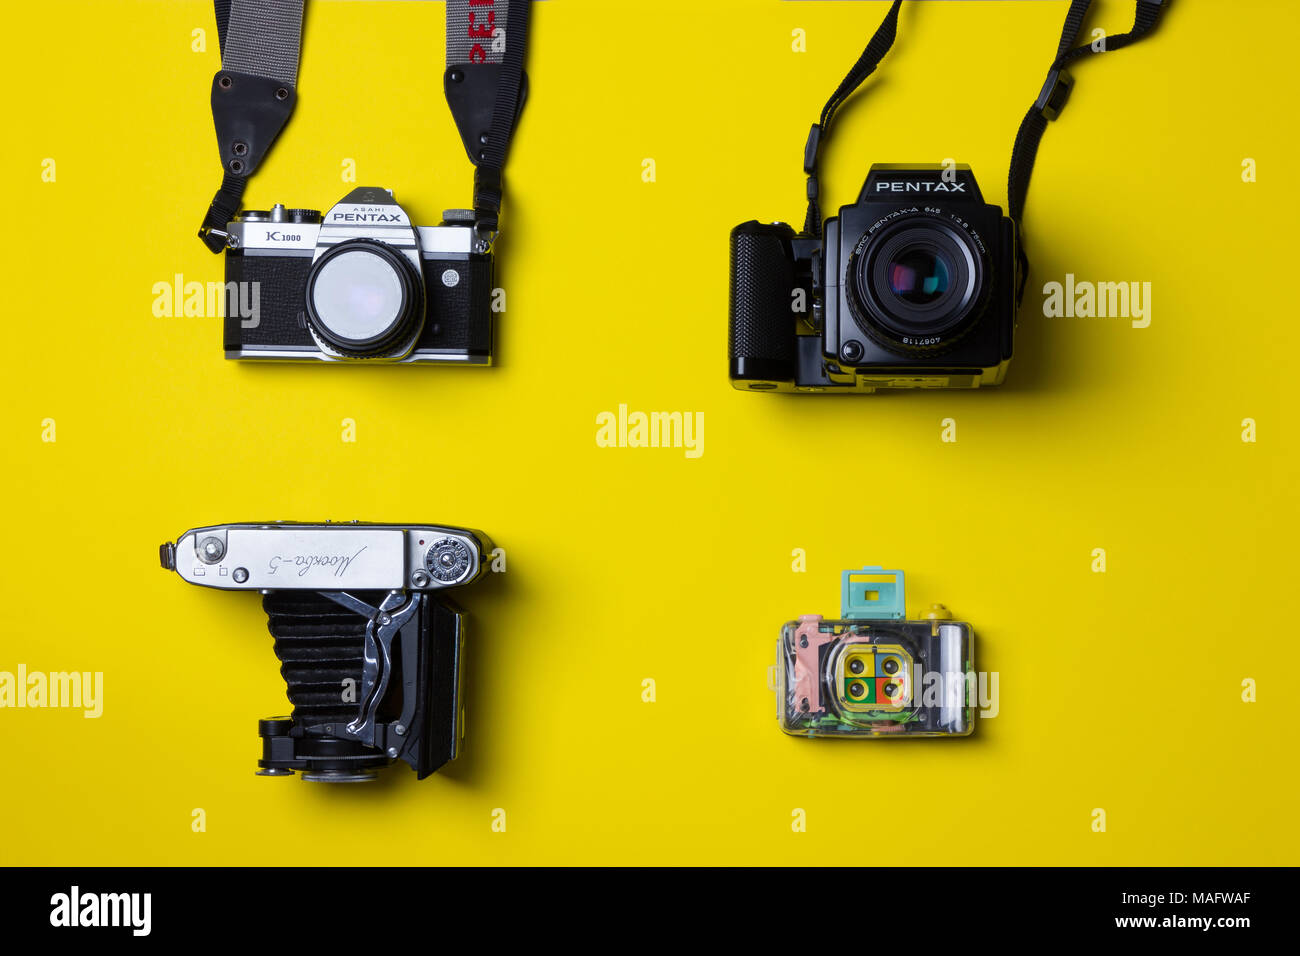 a fantastic studio shot of film cameras taken from above against a bright yellow background Stock Photo